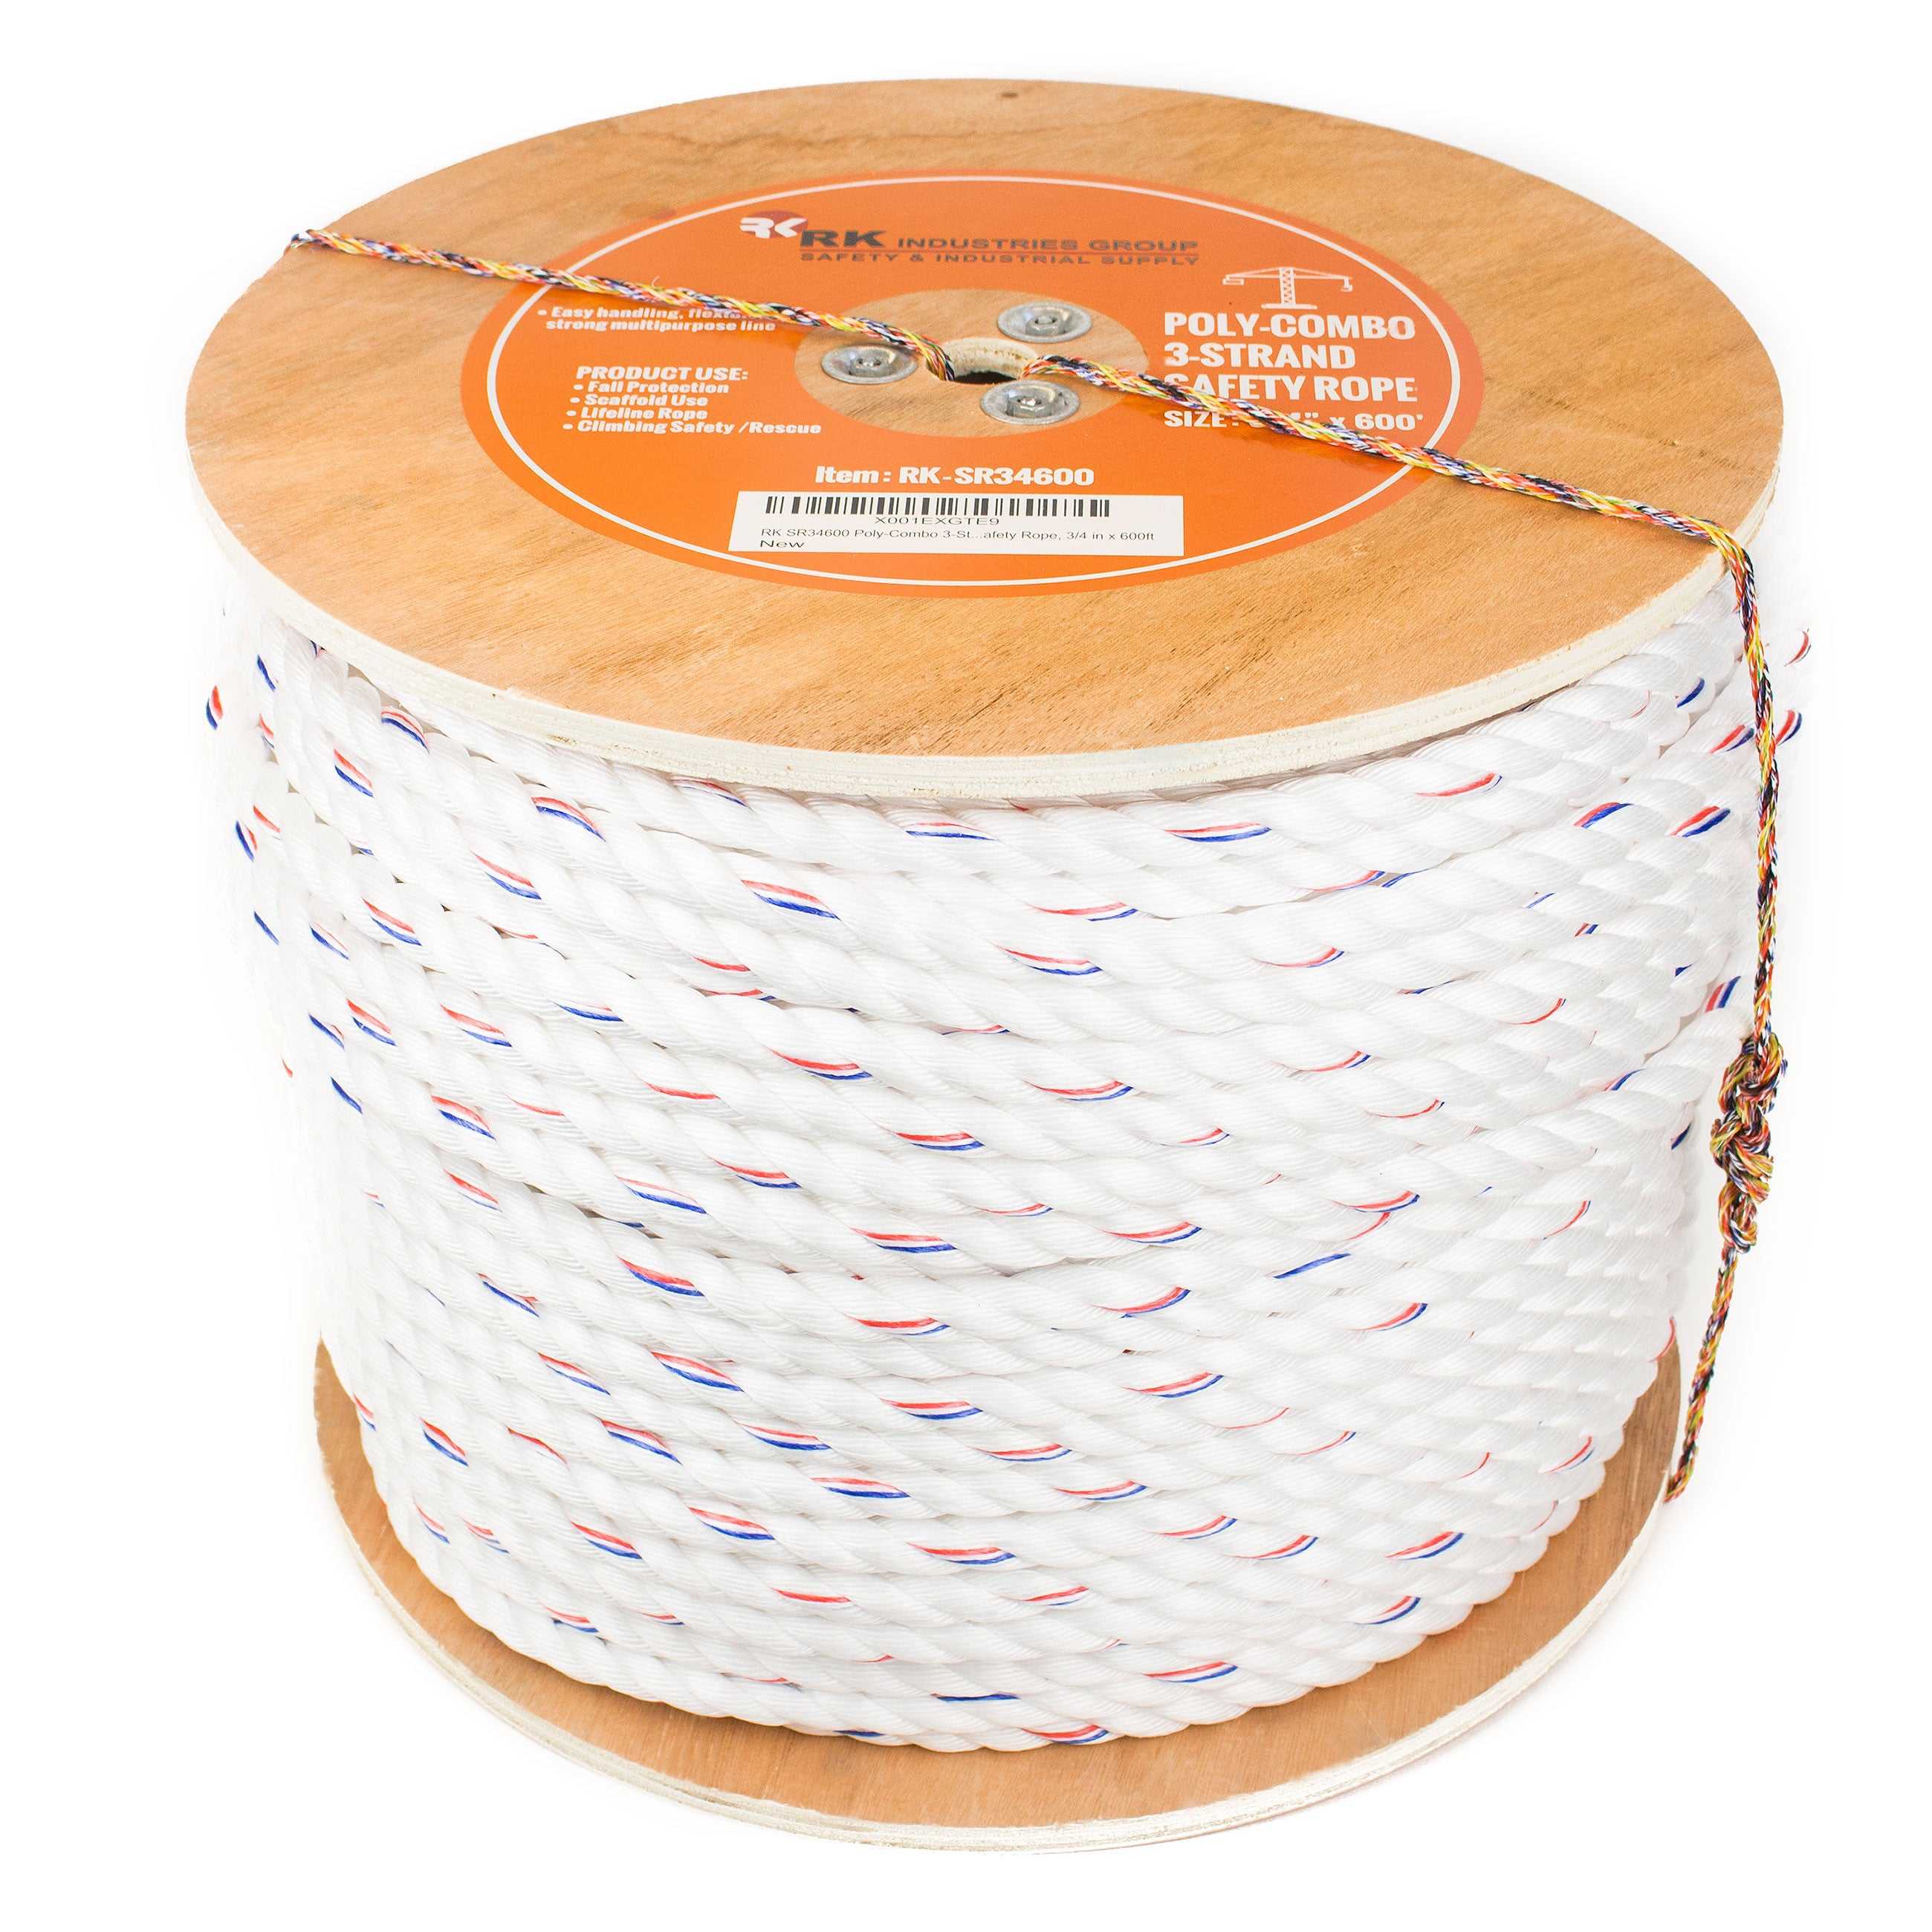 RK SR34600 Poly-Combo 3-Strand Safety Rope, 3/4 in x 600 ft